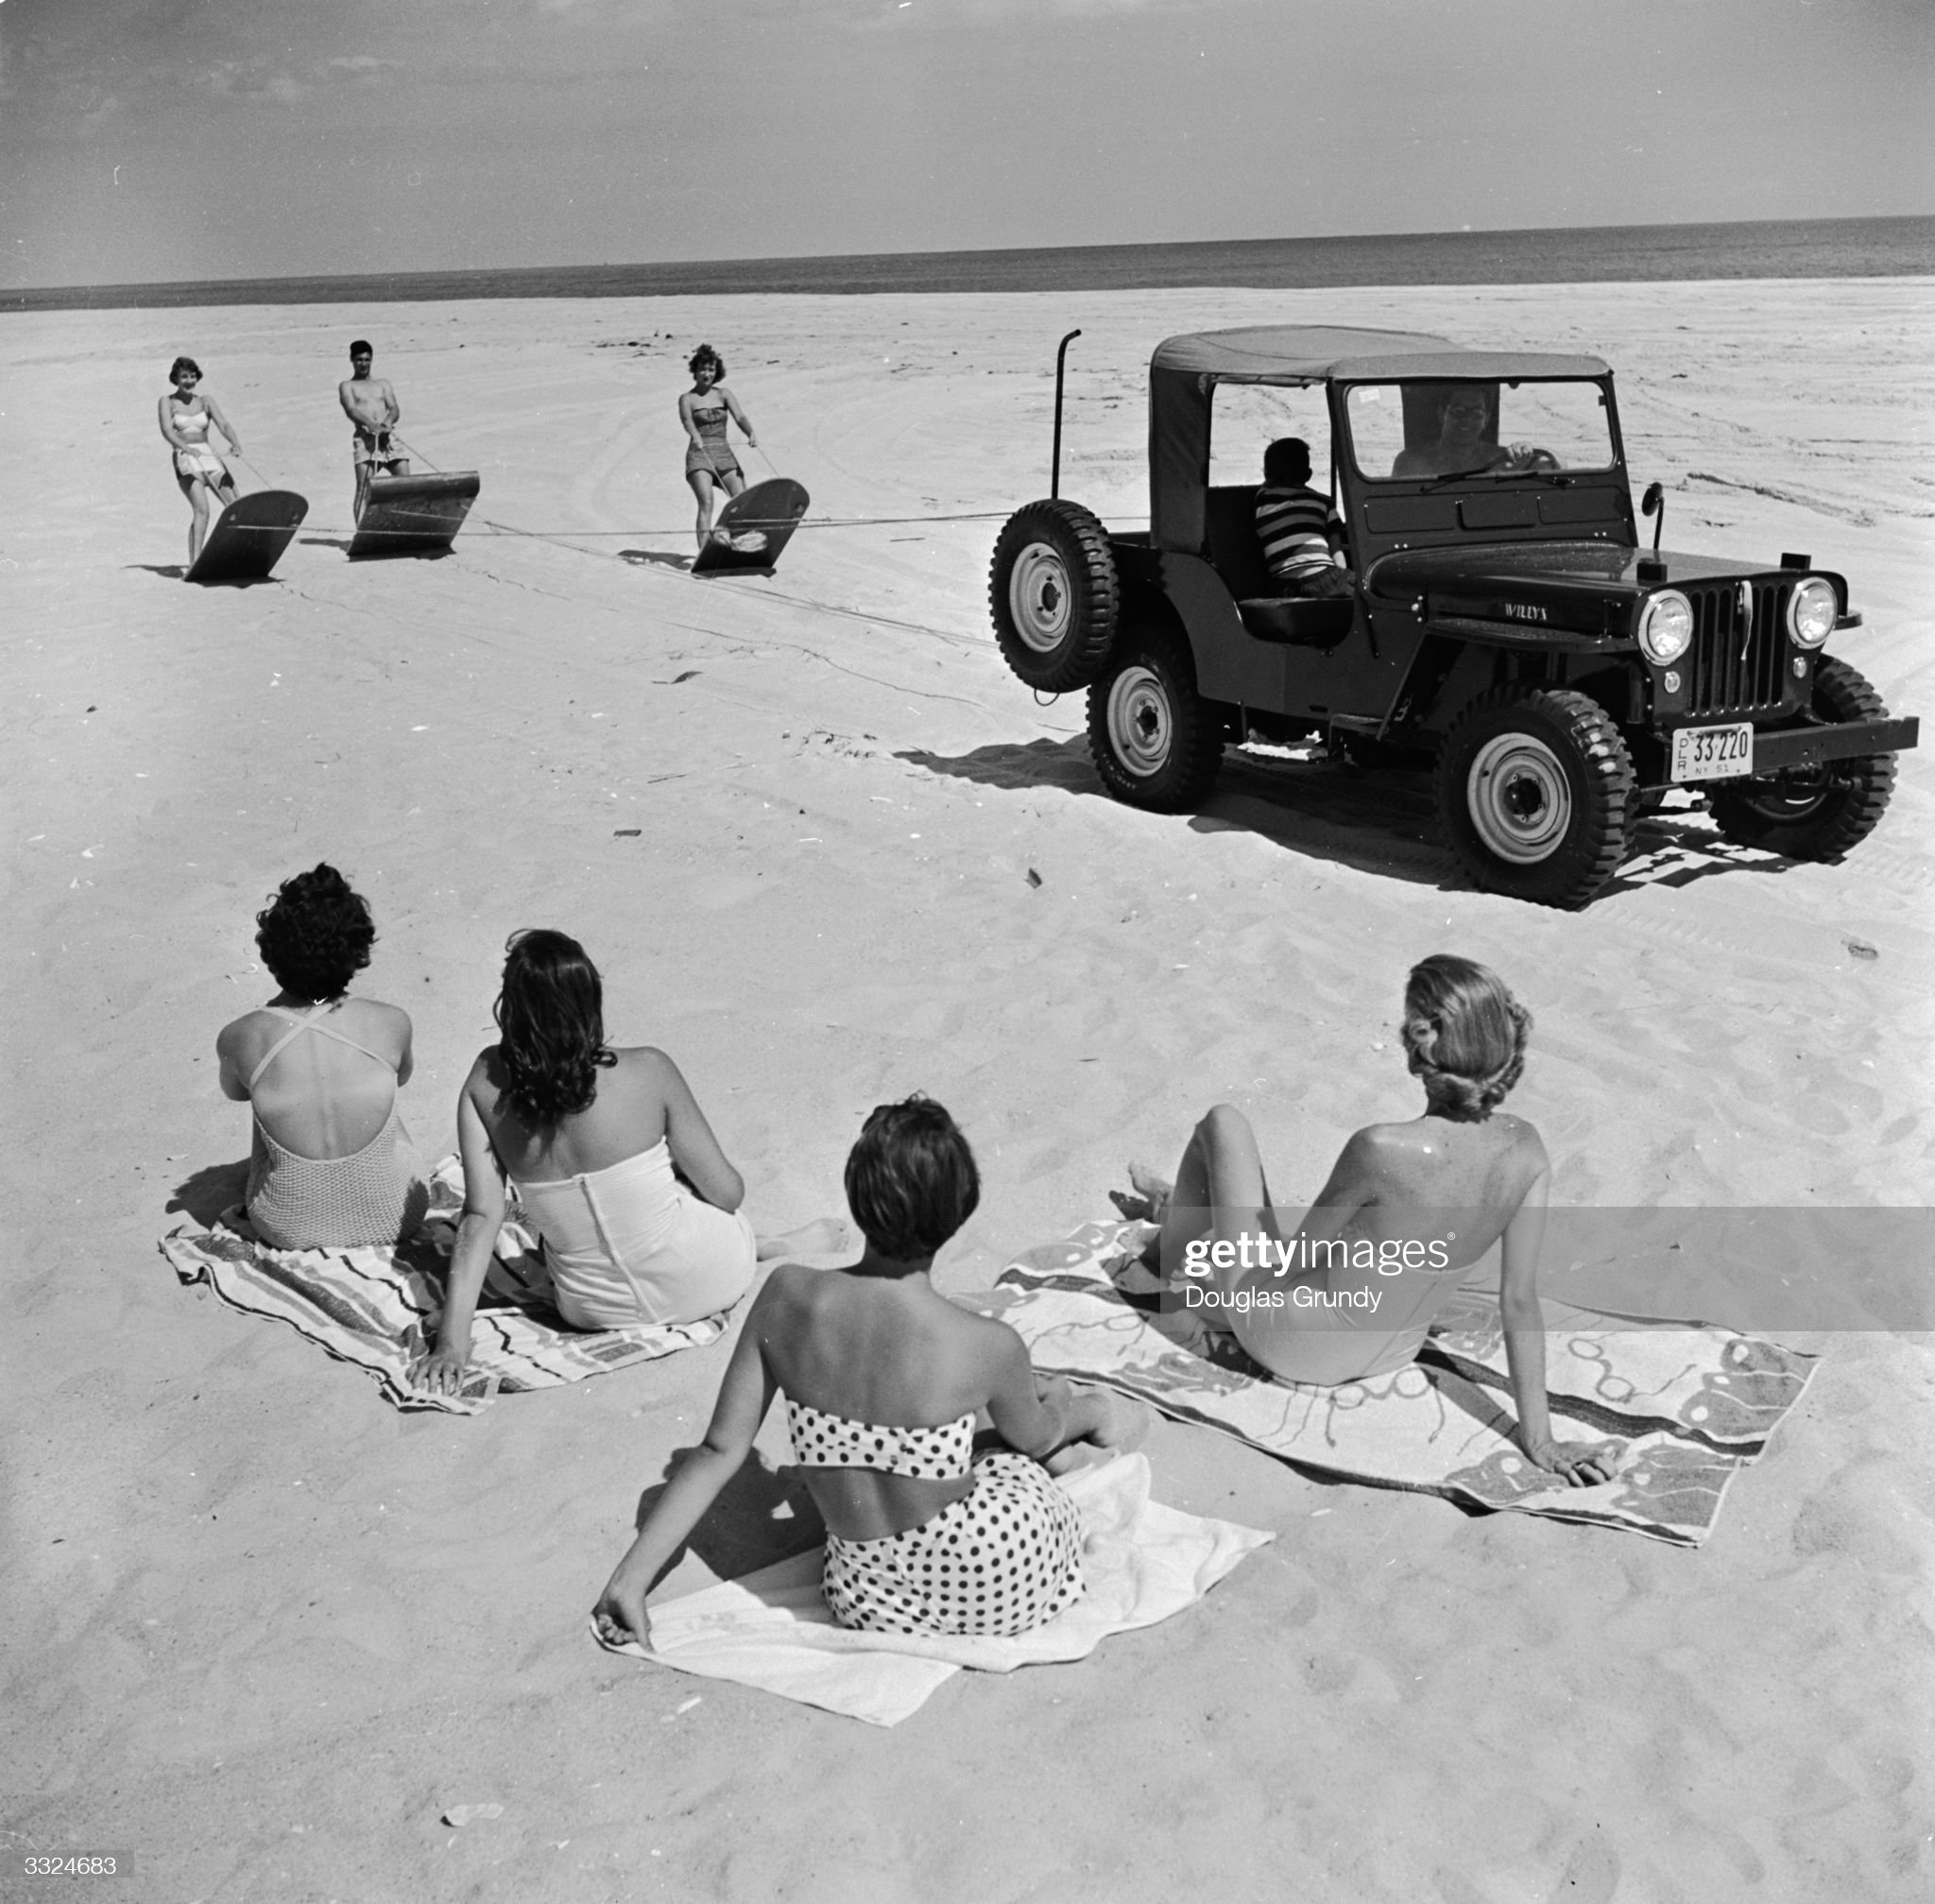 Circa 1955: an all-terrain vehicle towing three girls on sand skis across a beach on the east coast of America.